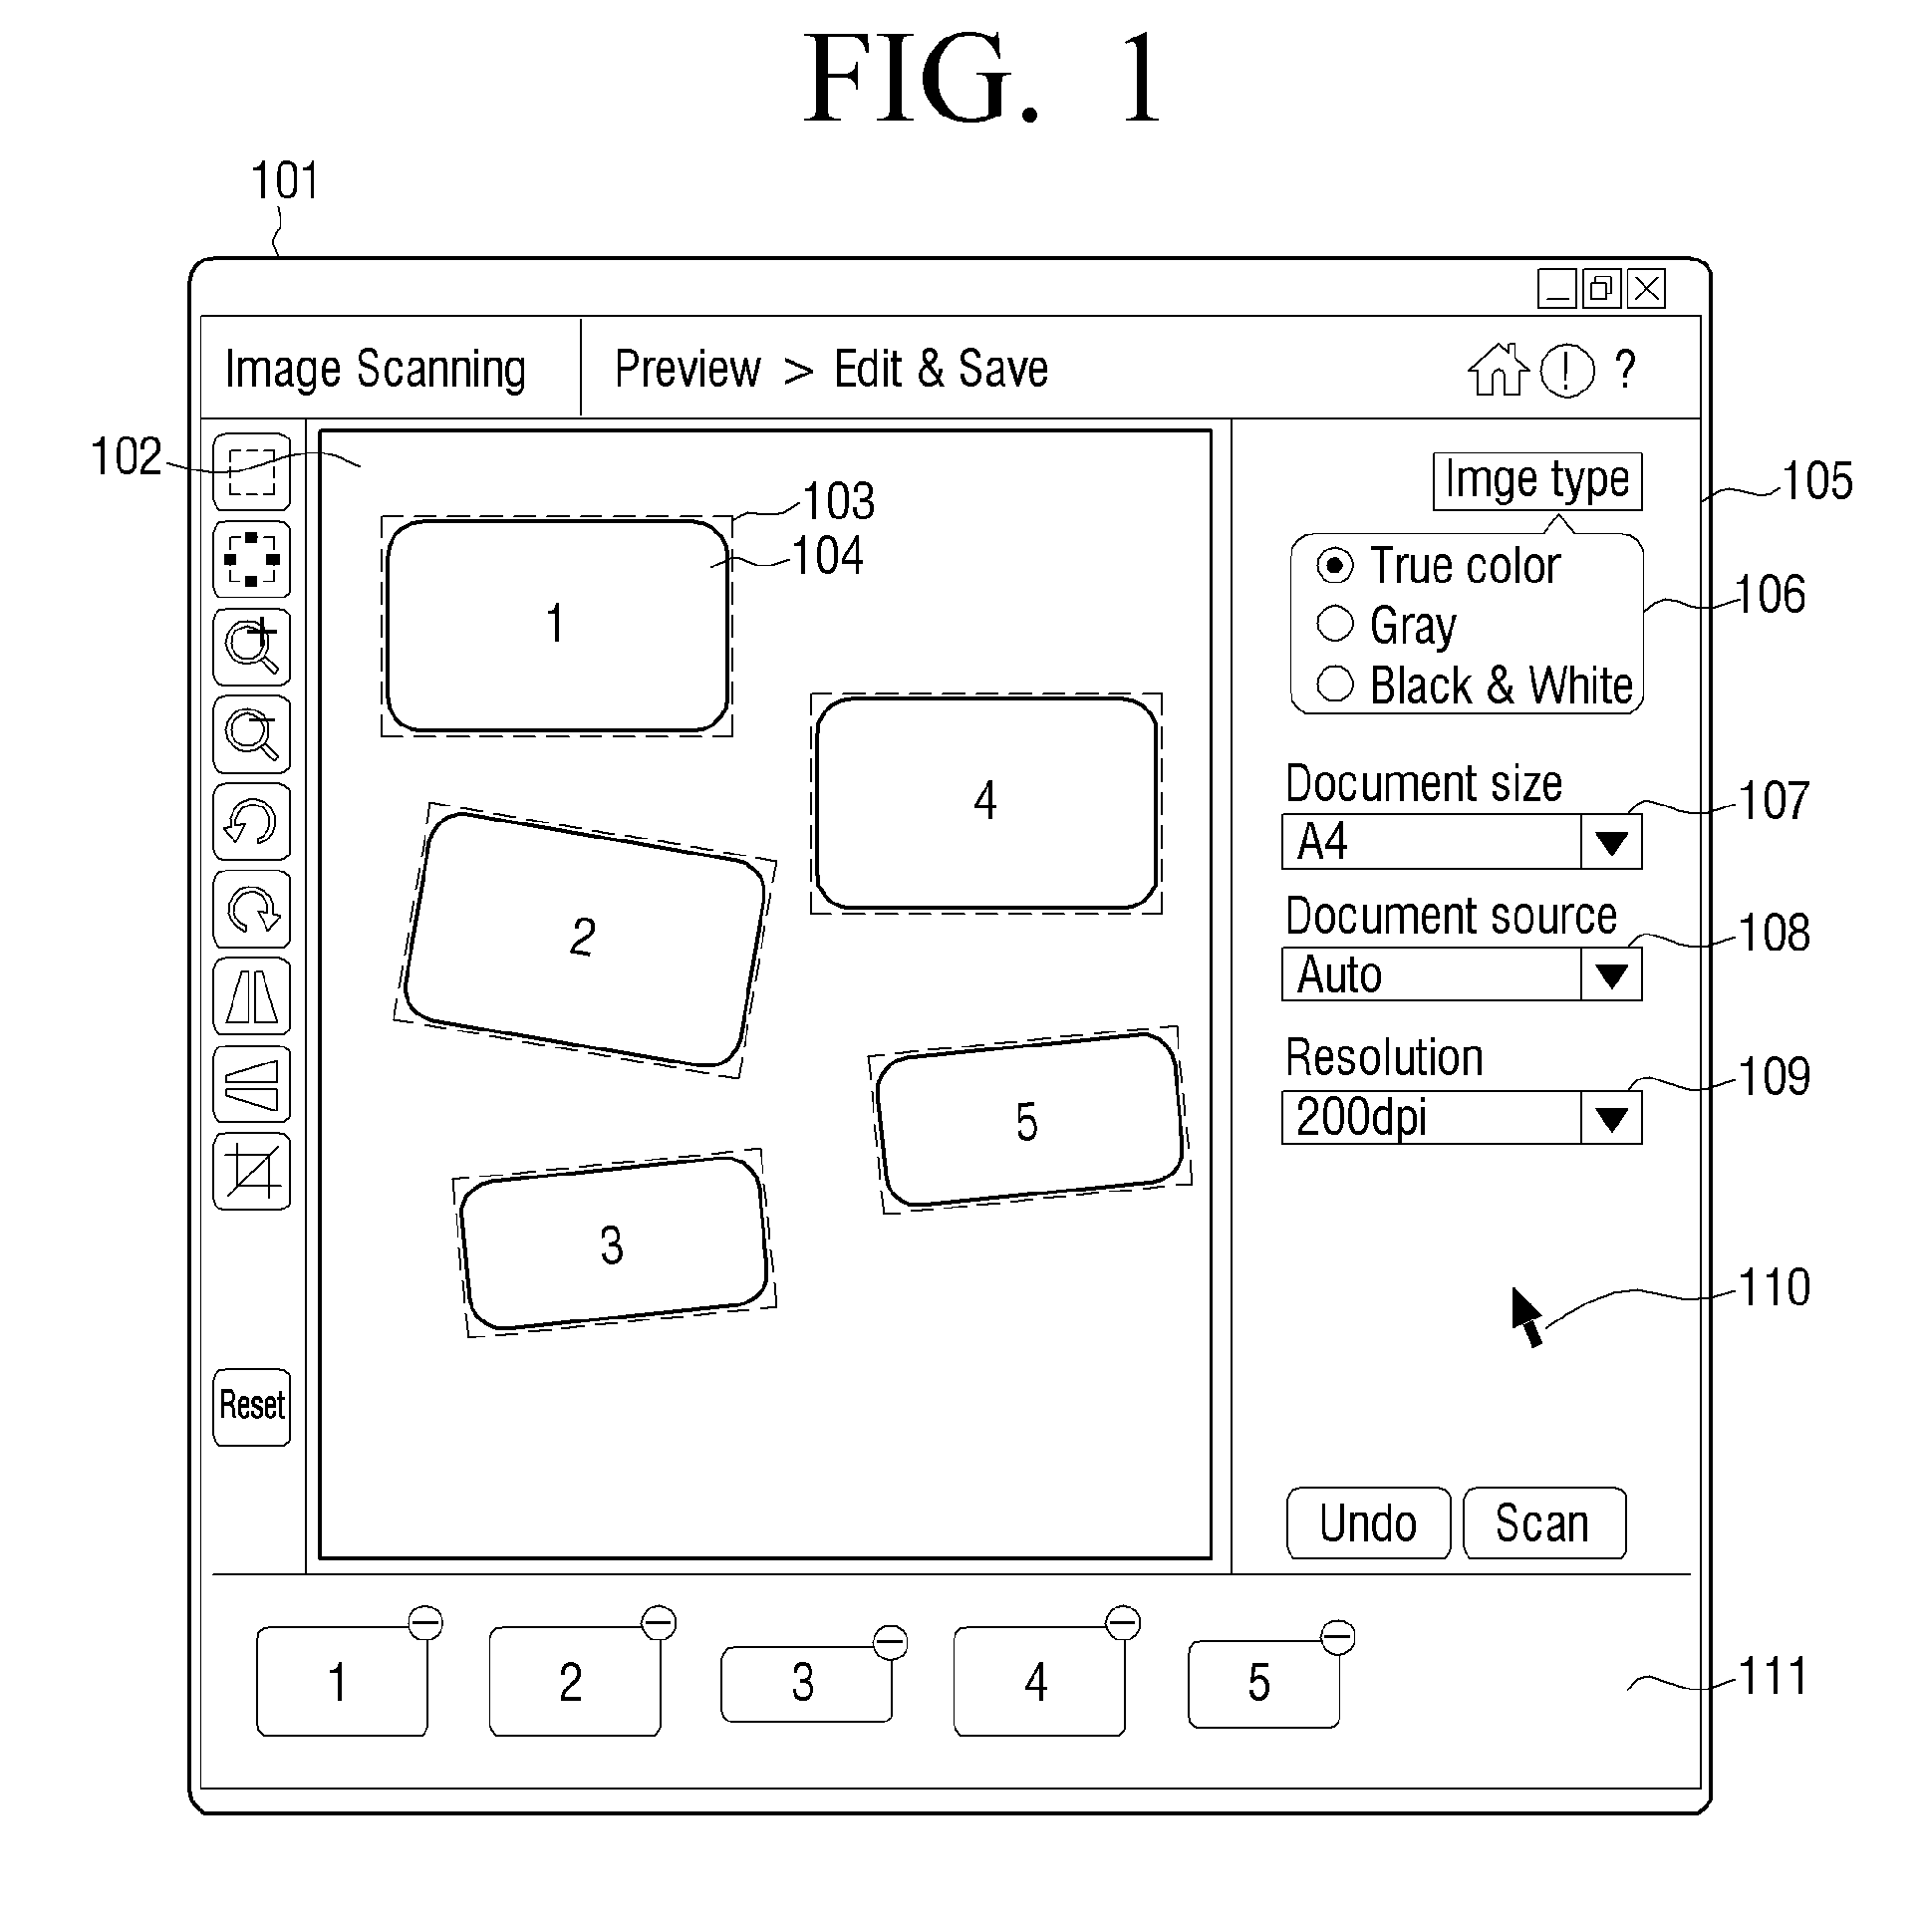 Method of editing static digital combined images comprising images of multiple objects